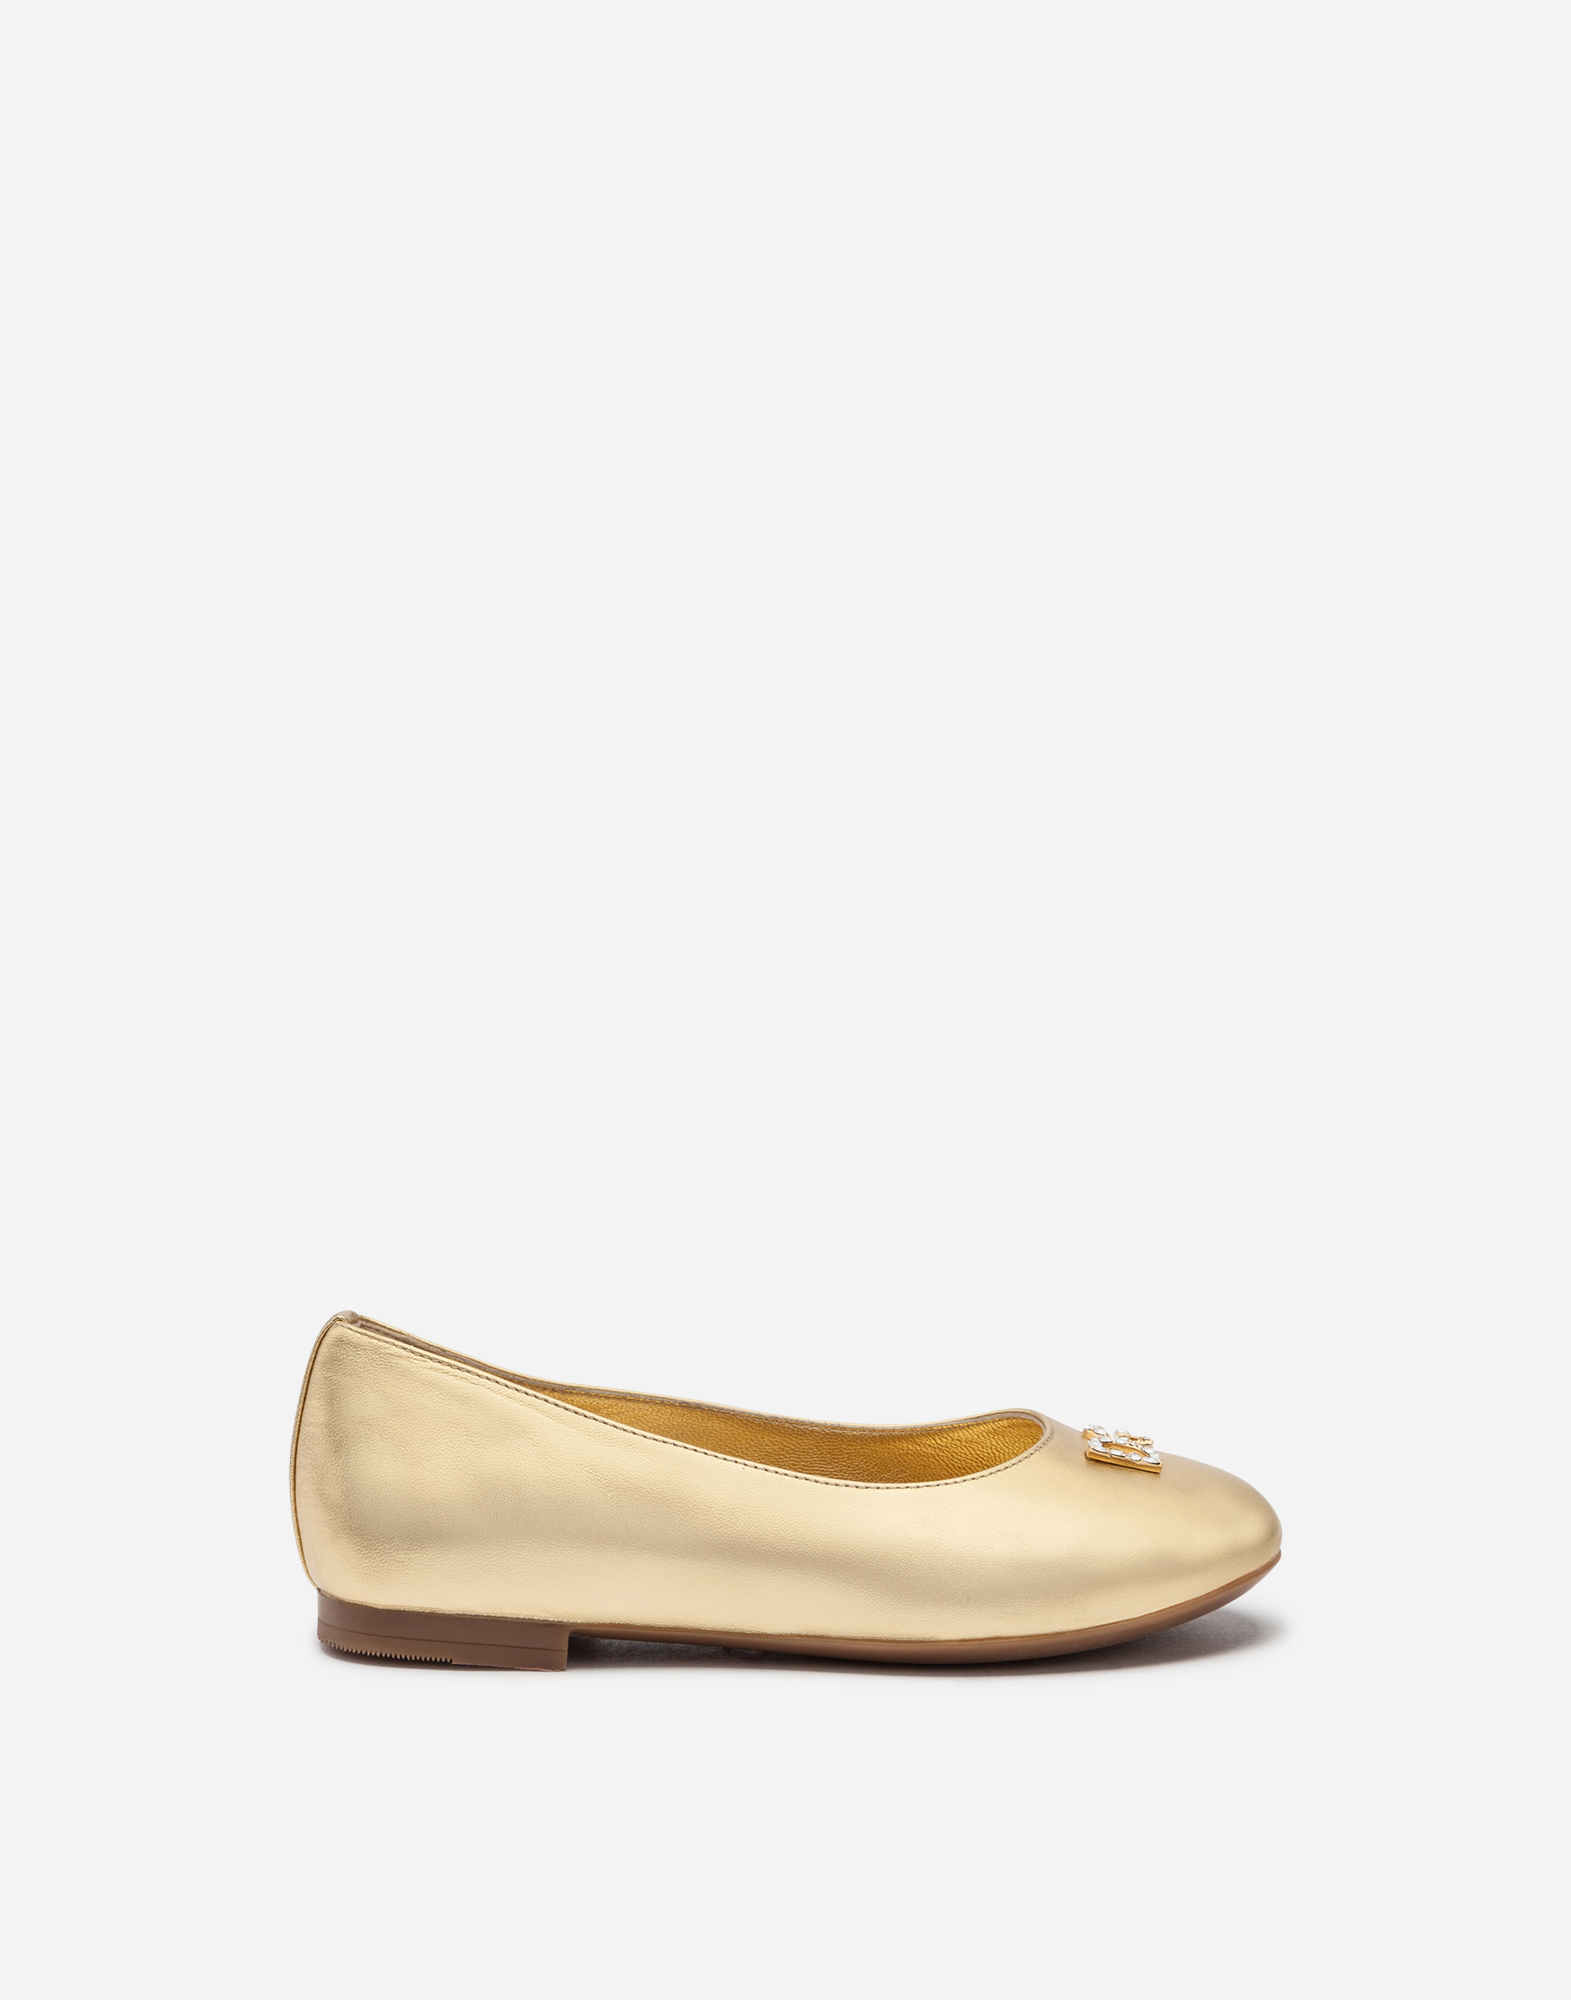 Foiled nappa leather ballet flats in Gold